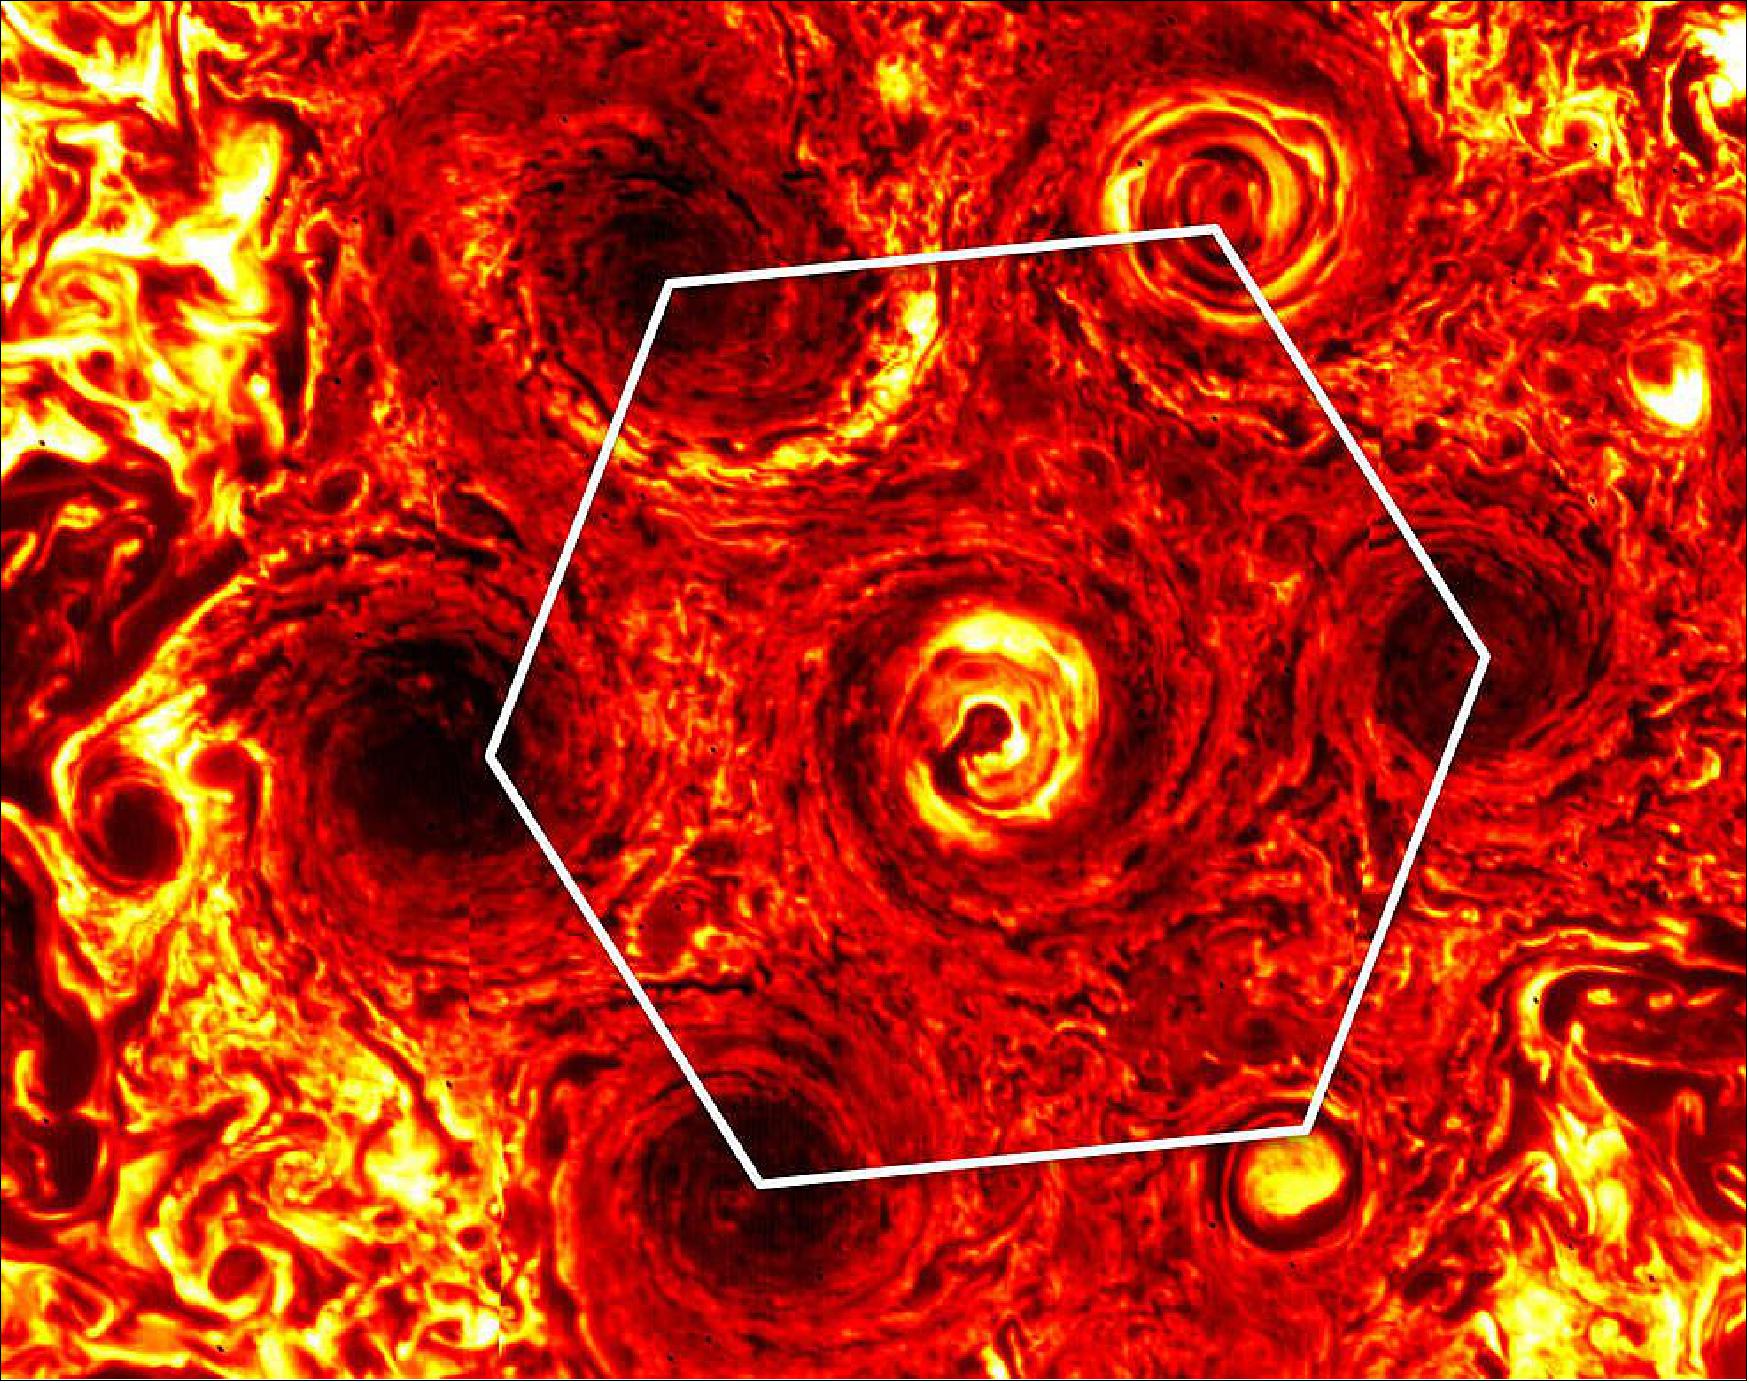 Figure 37: In this annotated infrared image, six cyclones form a hexagonal pattern around a central cyclone at Jupiter's south pole. The image was generated from data collected by NASA's Juno spacecraft on Nov. 4, 2019 (image credits: NASA/JPL-Caltech/SwRI/ASI/INAF/JIRAM)